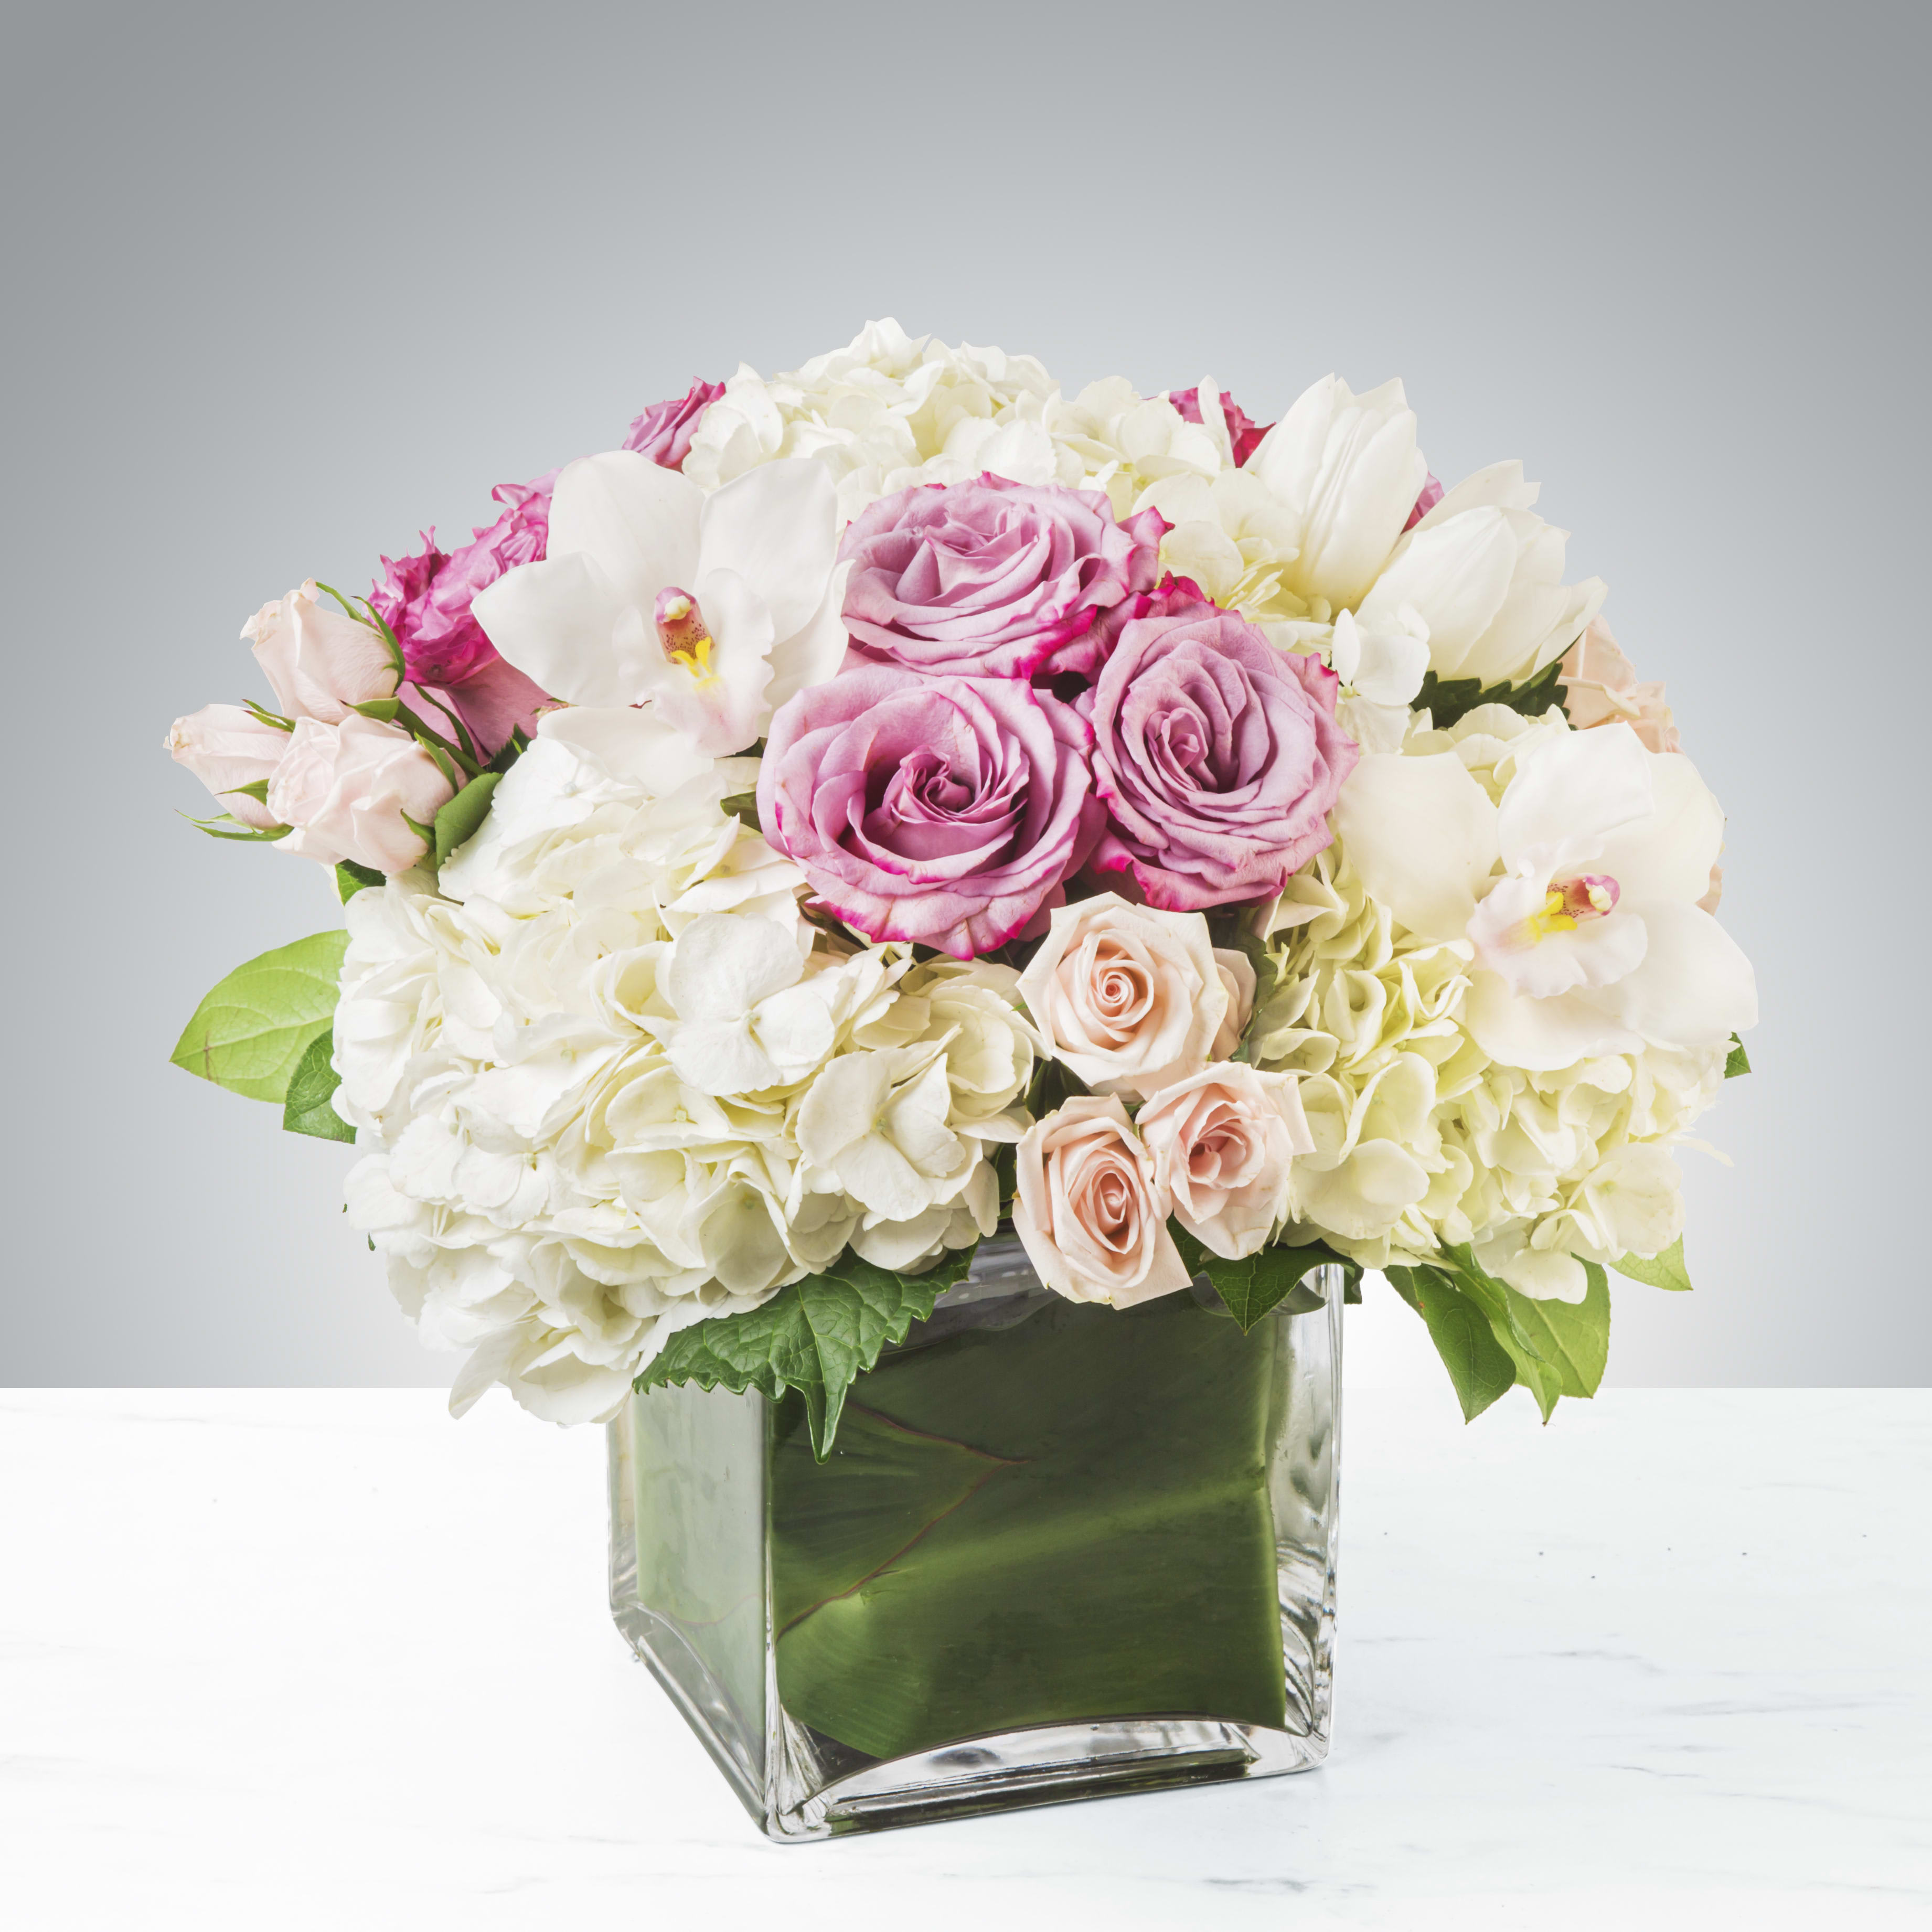 Carolina by BloomNation™ - Classic and Beautiful, this large arrangement whispers luxury. Soft pinks, whites and creams come together to create an appealingly feminine gift. Perfect for welcoming a new baby, wishing happy birthday or saying congratulations.   APPROXIMATE DIMENSIONS: 15&quot; W X 15&quot; H    